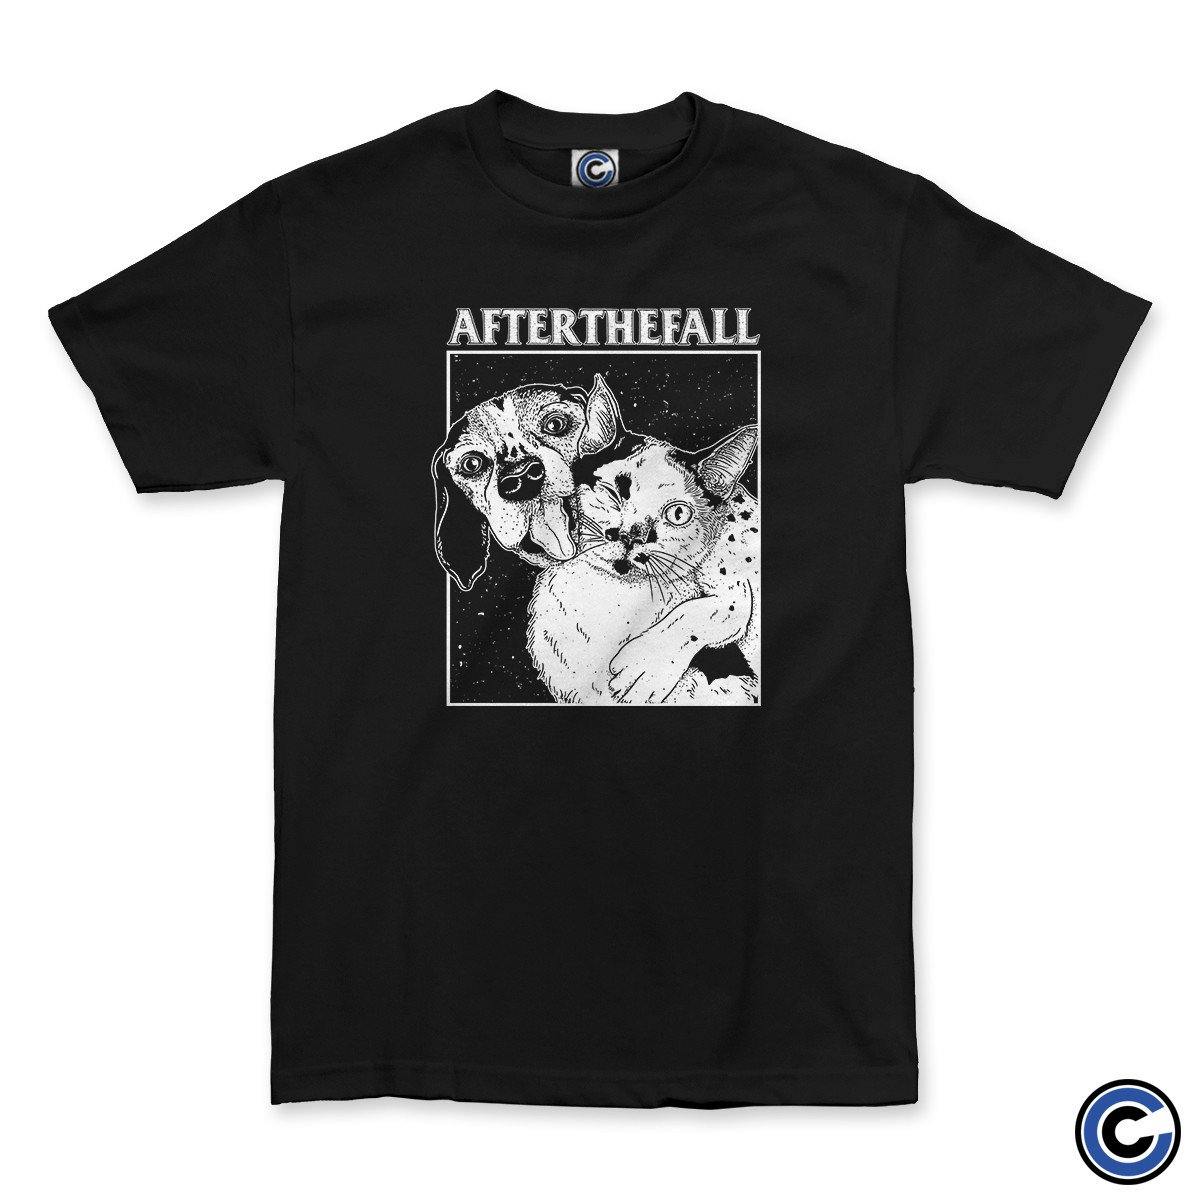 Buy – After the Fall "Animal Friends" Shirt – Band & Music Merch – Cold Cuts Merch